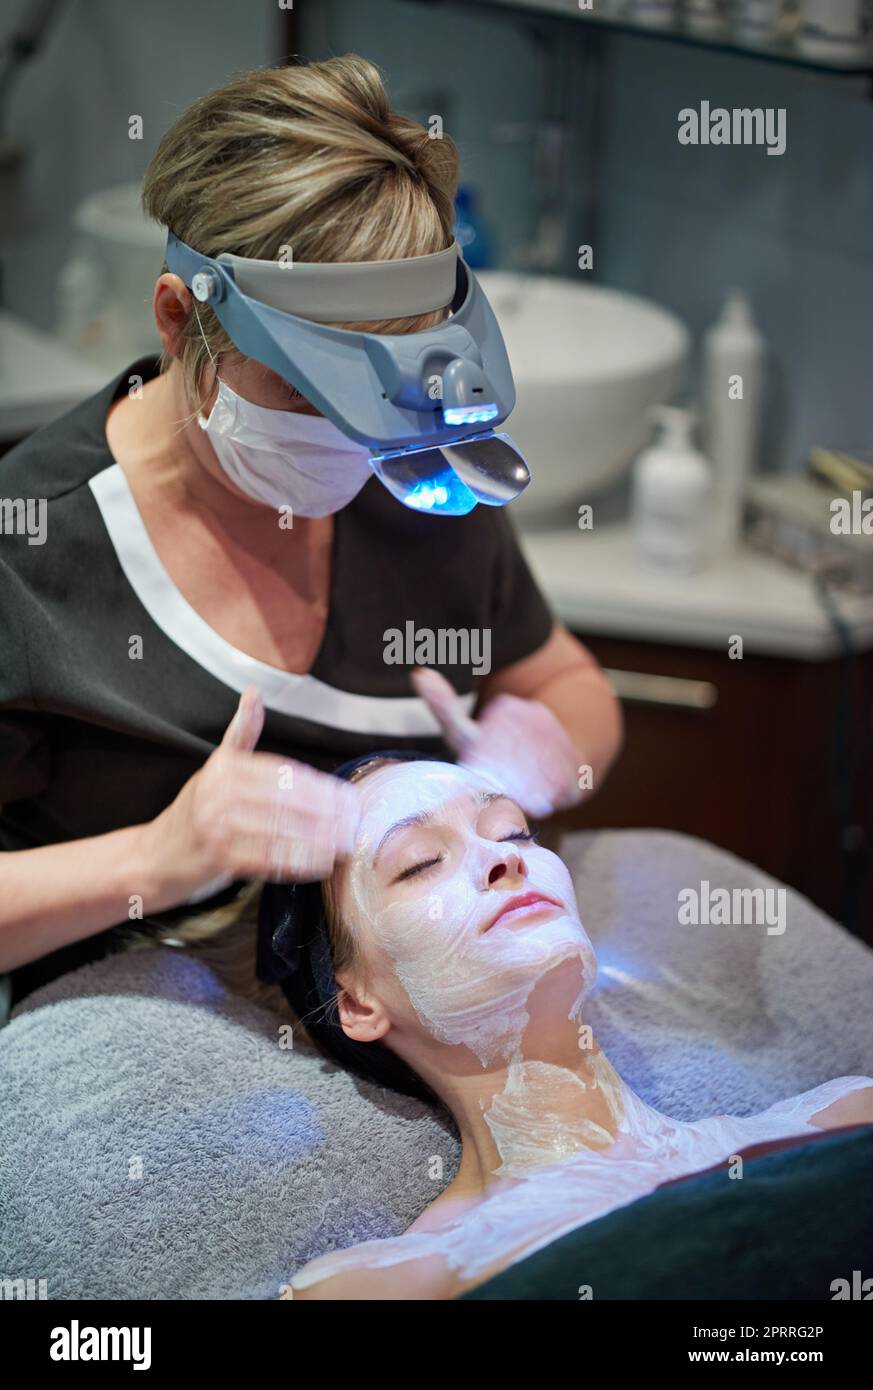 Rejuvenating youthfulness. a woman getting a facial treatment at a clinic. Stock Photo